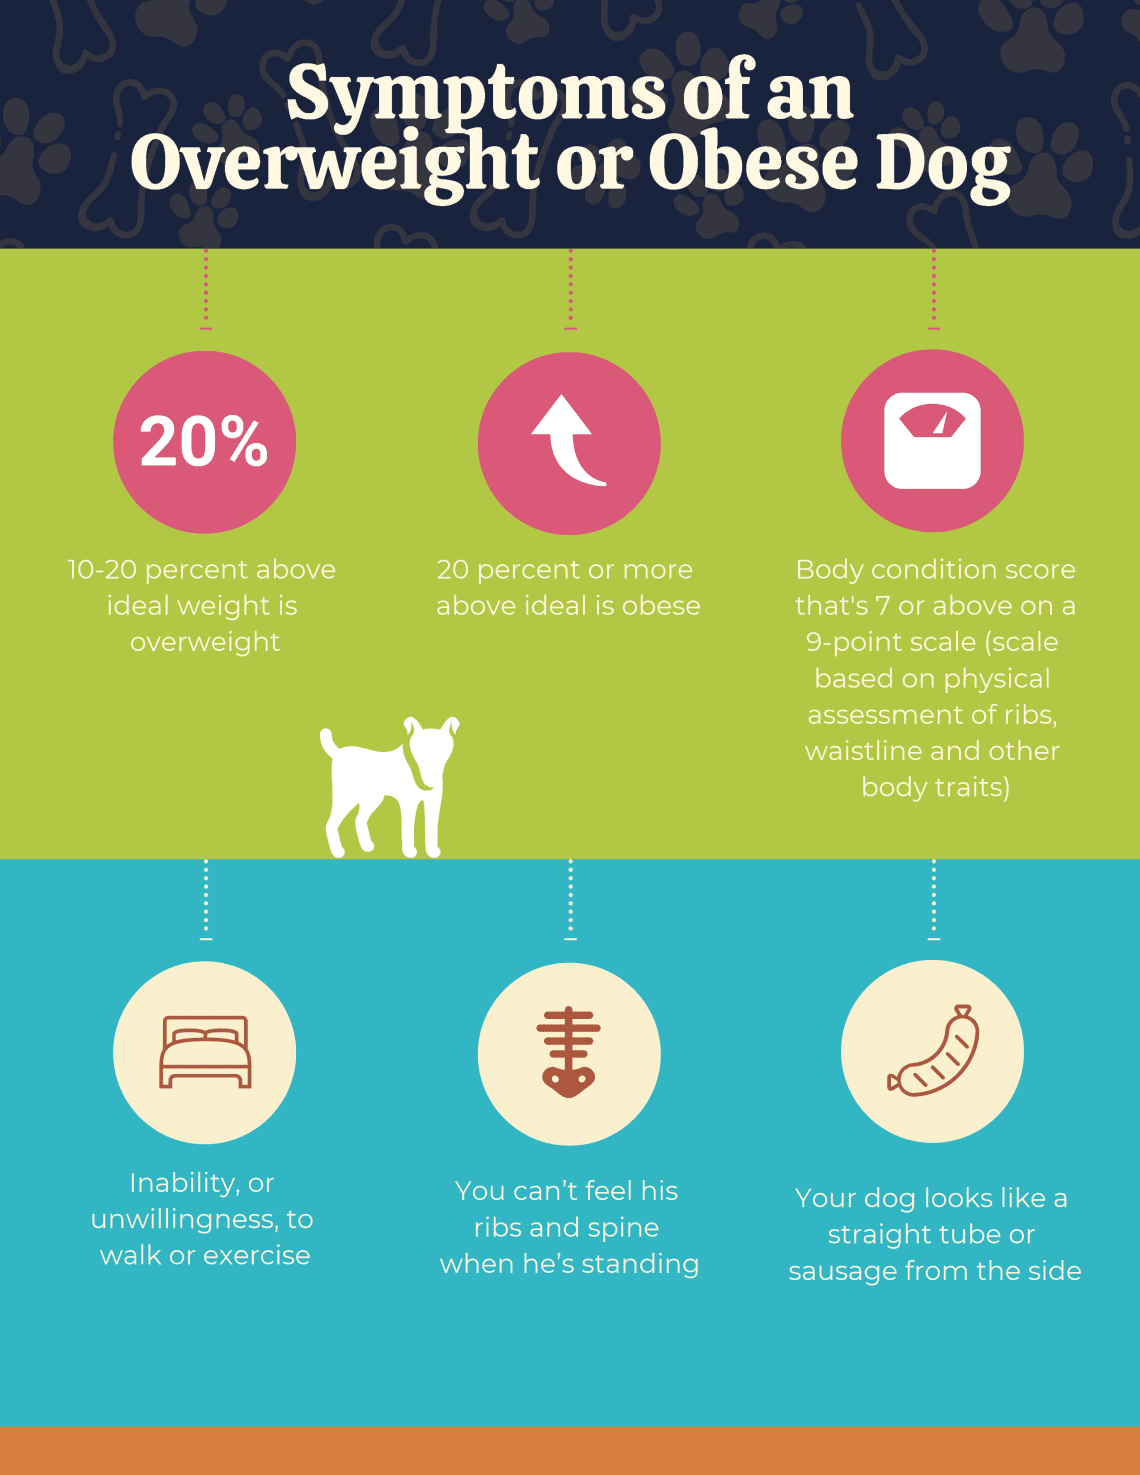 Symptoms and Risks of Overeating in Dogs